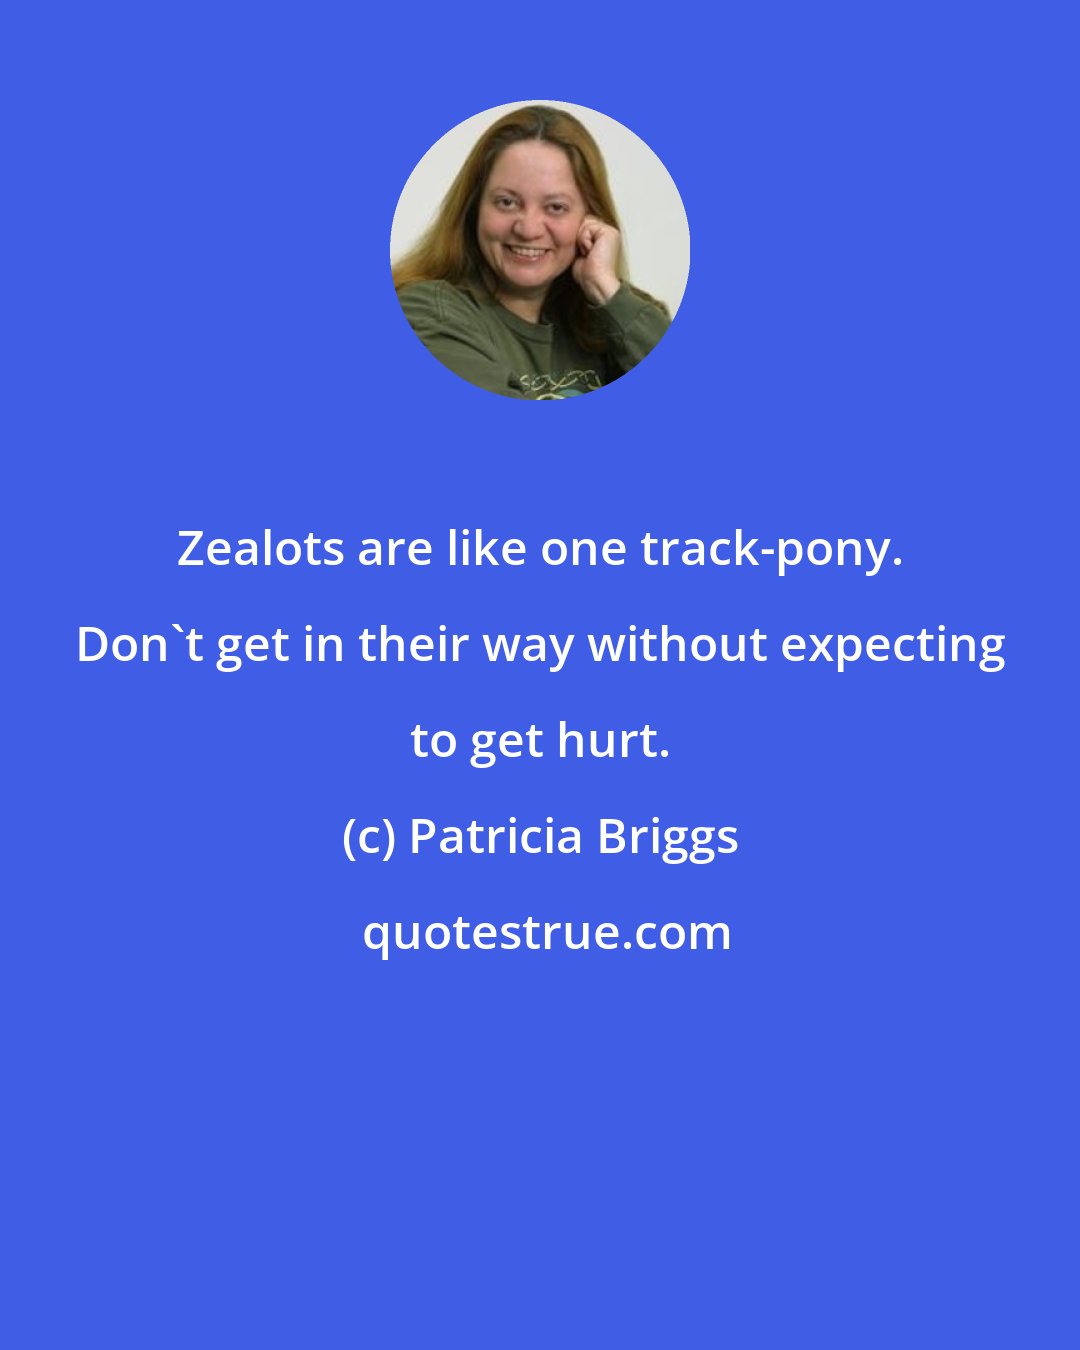 Patricia Briggs: Zealots are like one track-pony. Don't get in their way without expecting to get hurt.